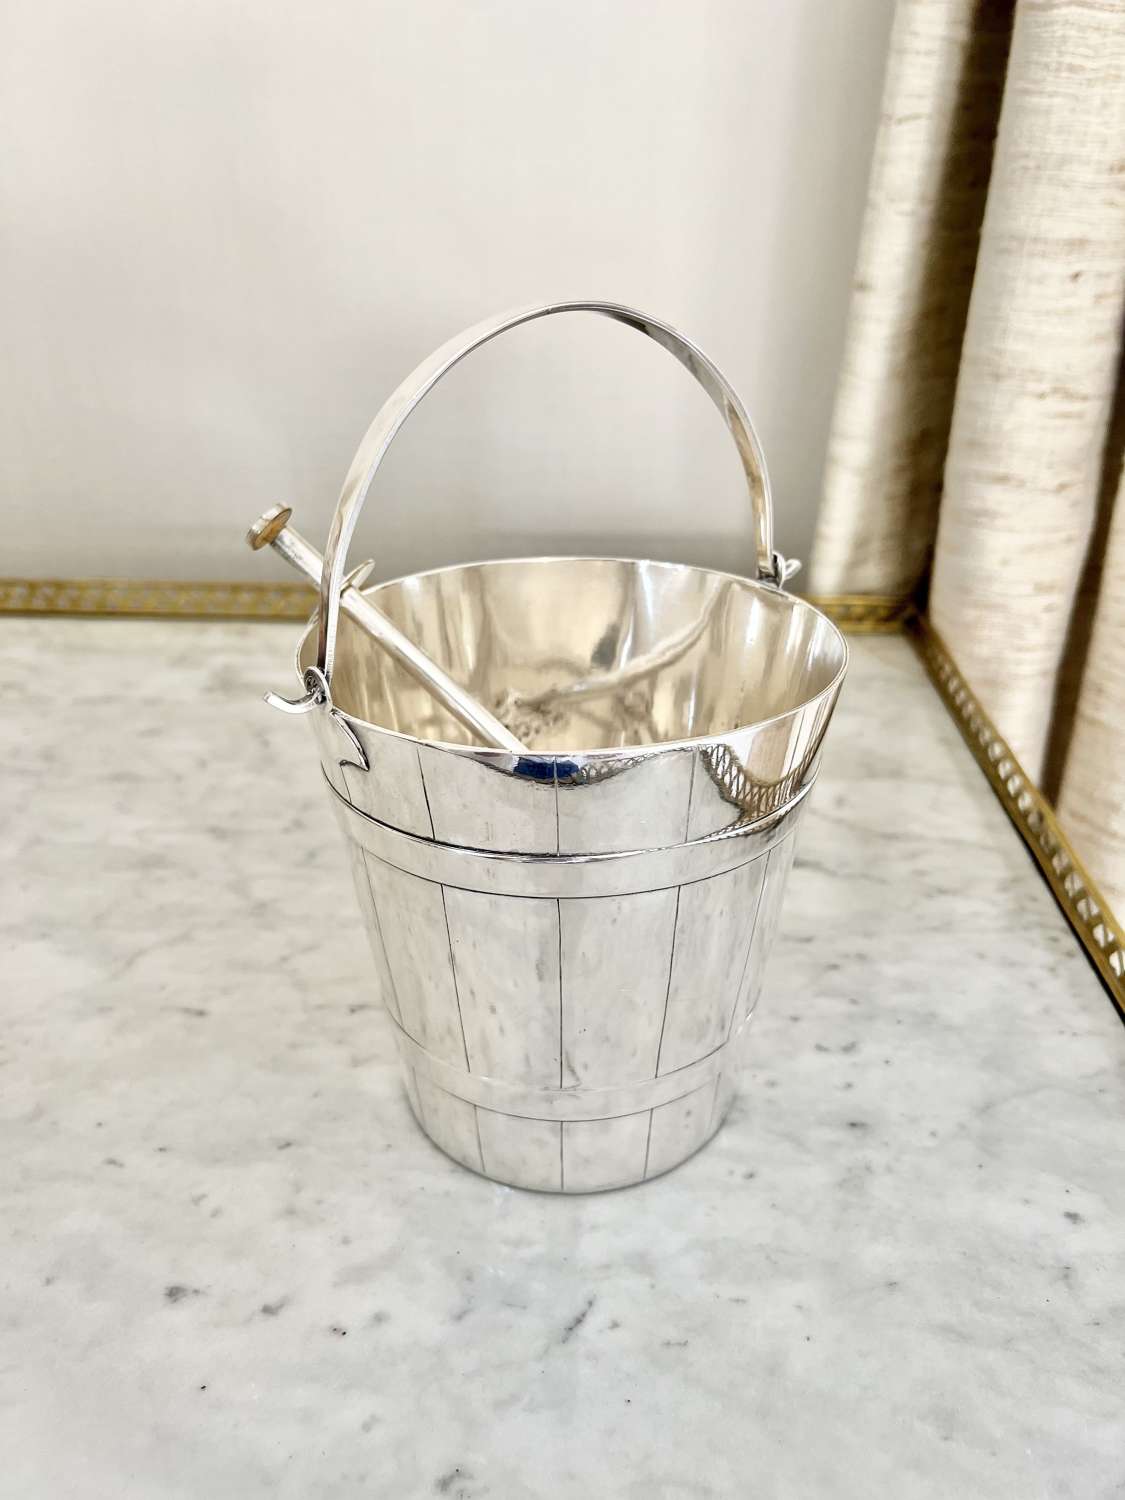 Excellent Quality Silver Plated ‘Coopered Pail’ Swing Handled Ice Buck